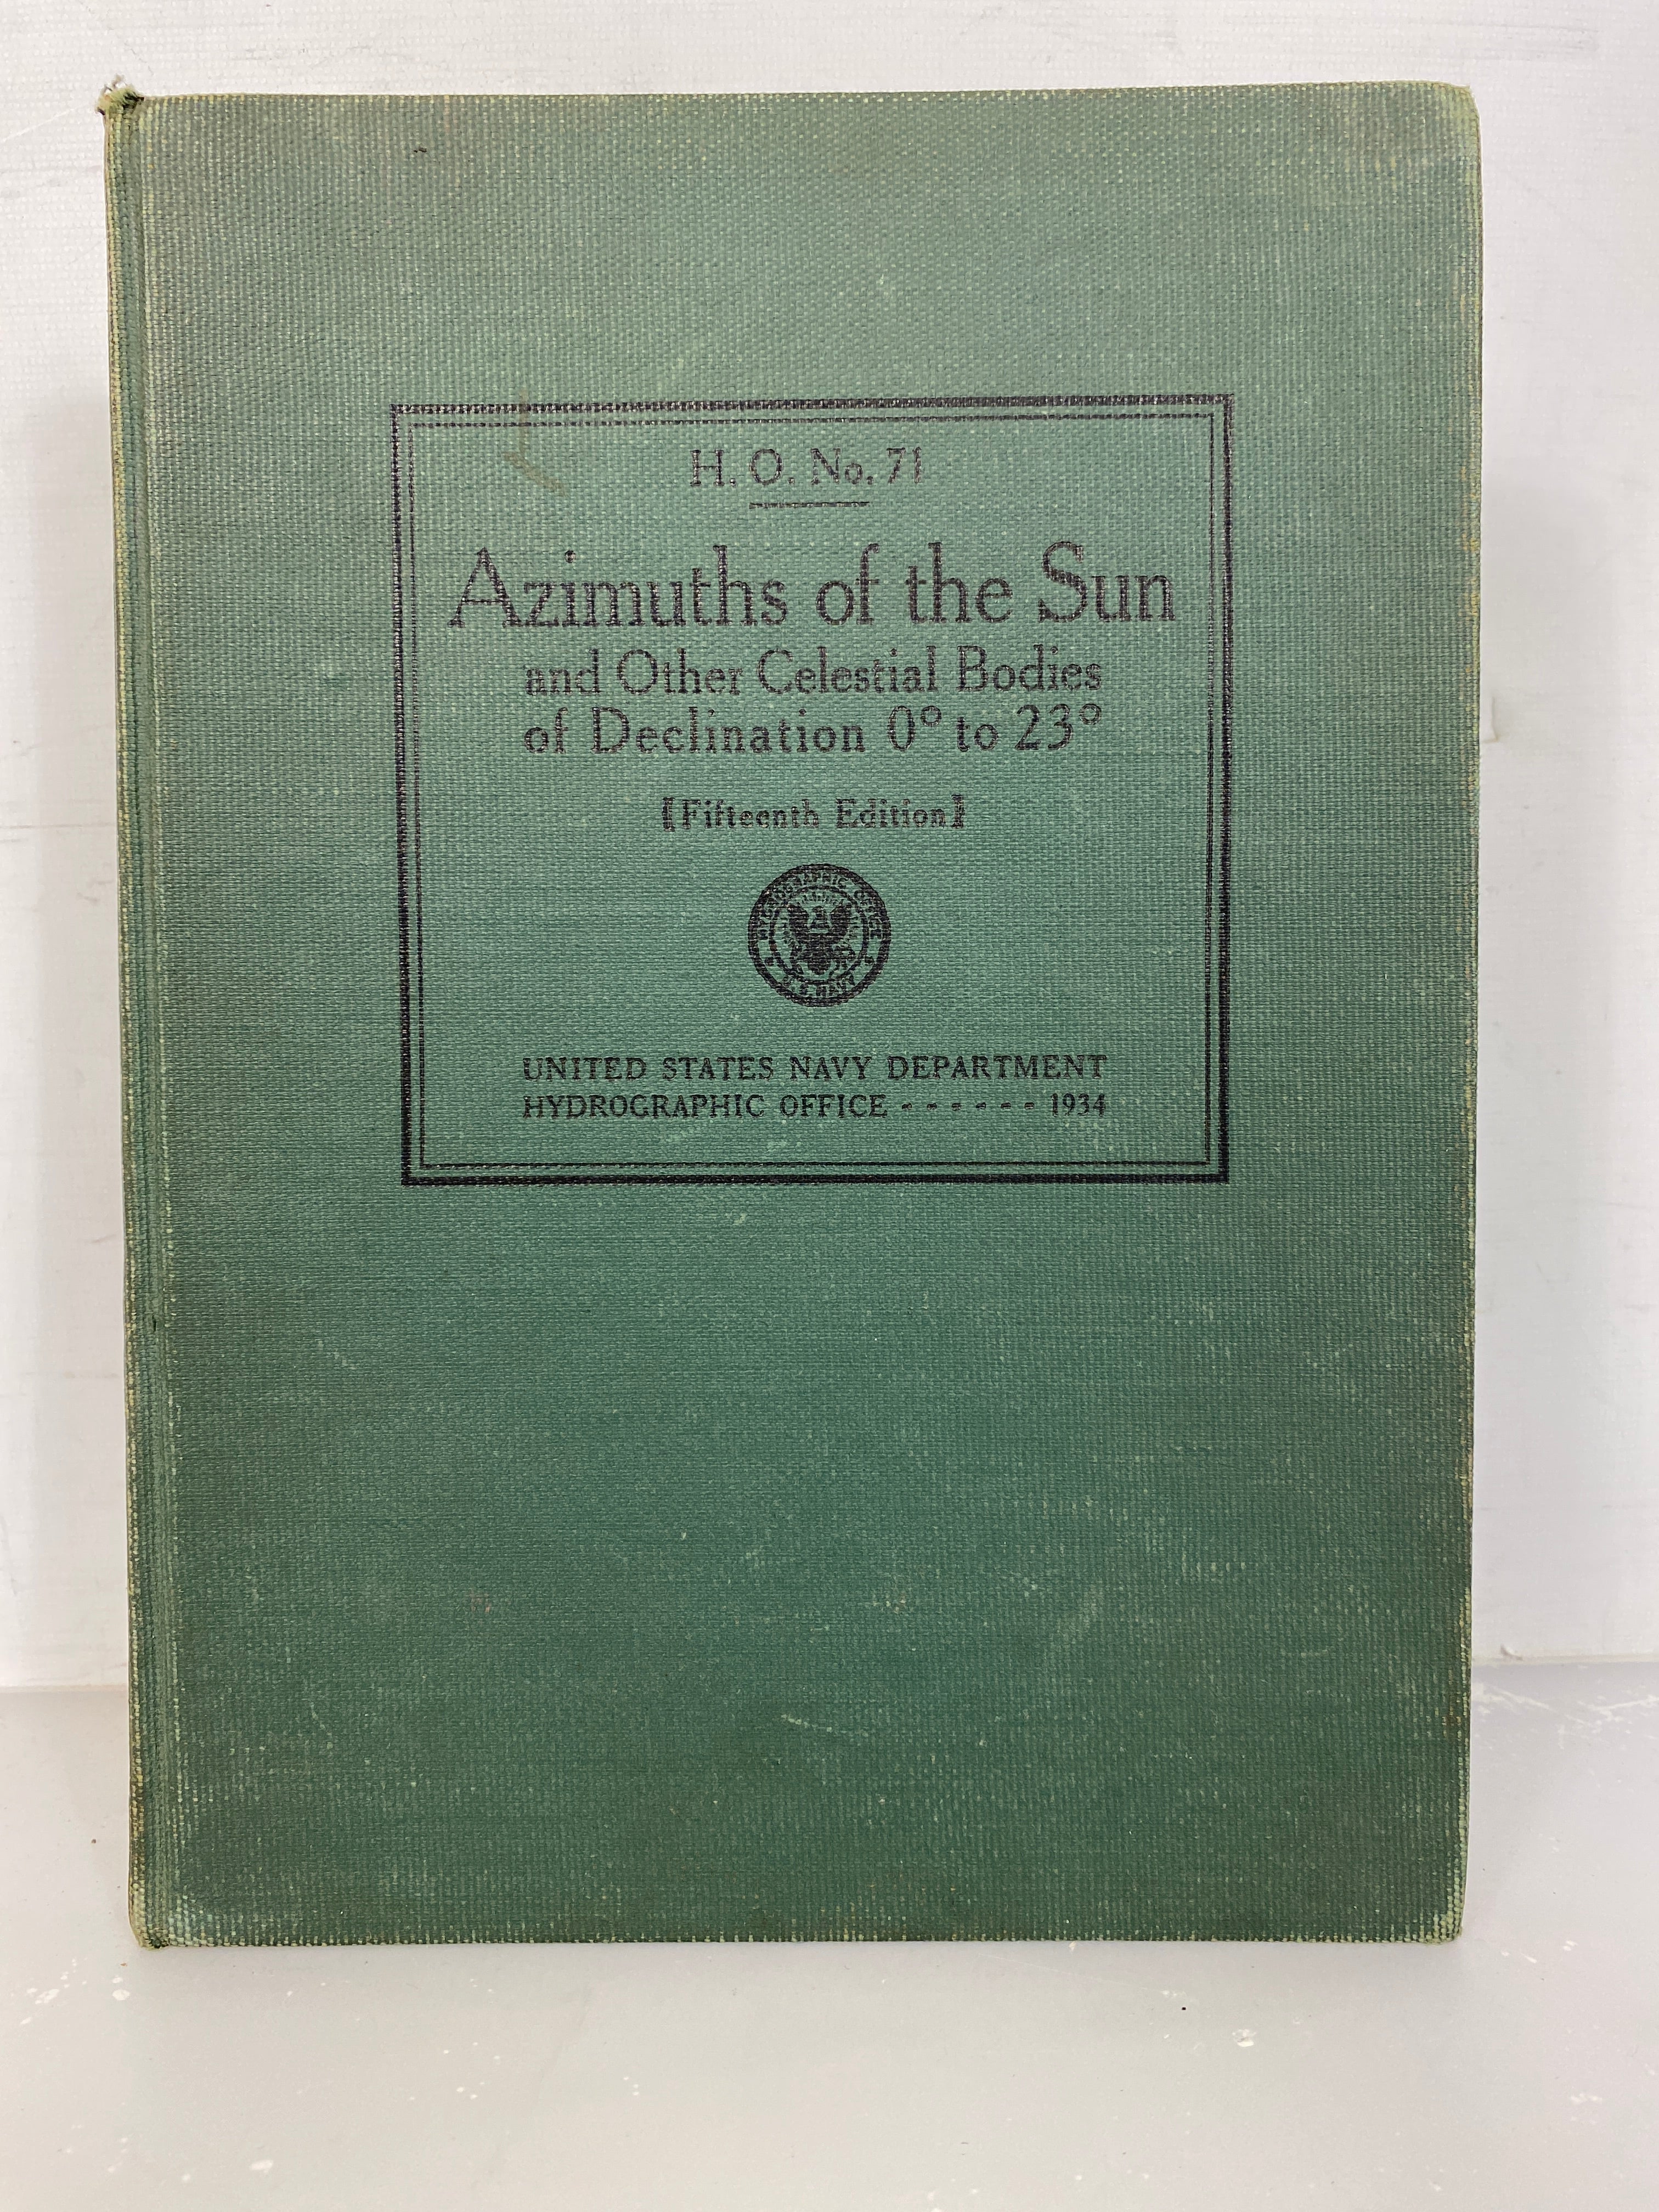 Azimuths of the Sun and Other Celestial Bodies of Declination Fifteenth Edition U.S. Government Printing Office 1934 HC